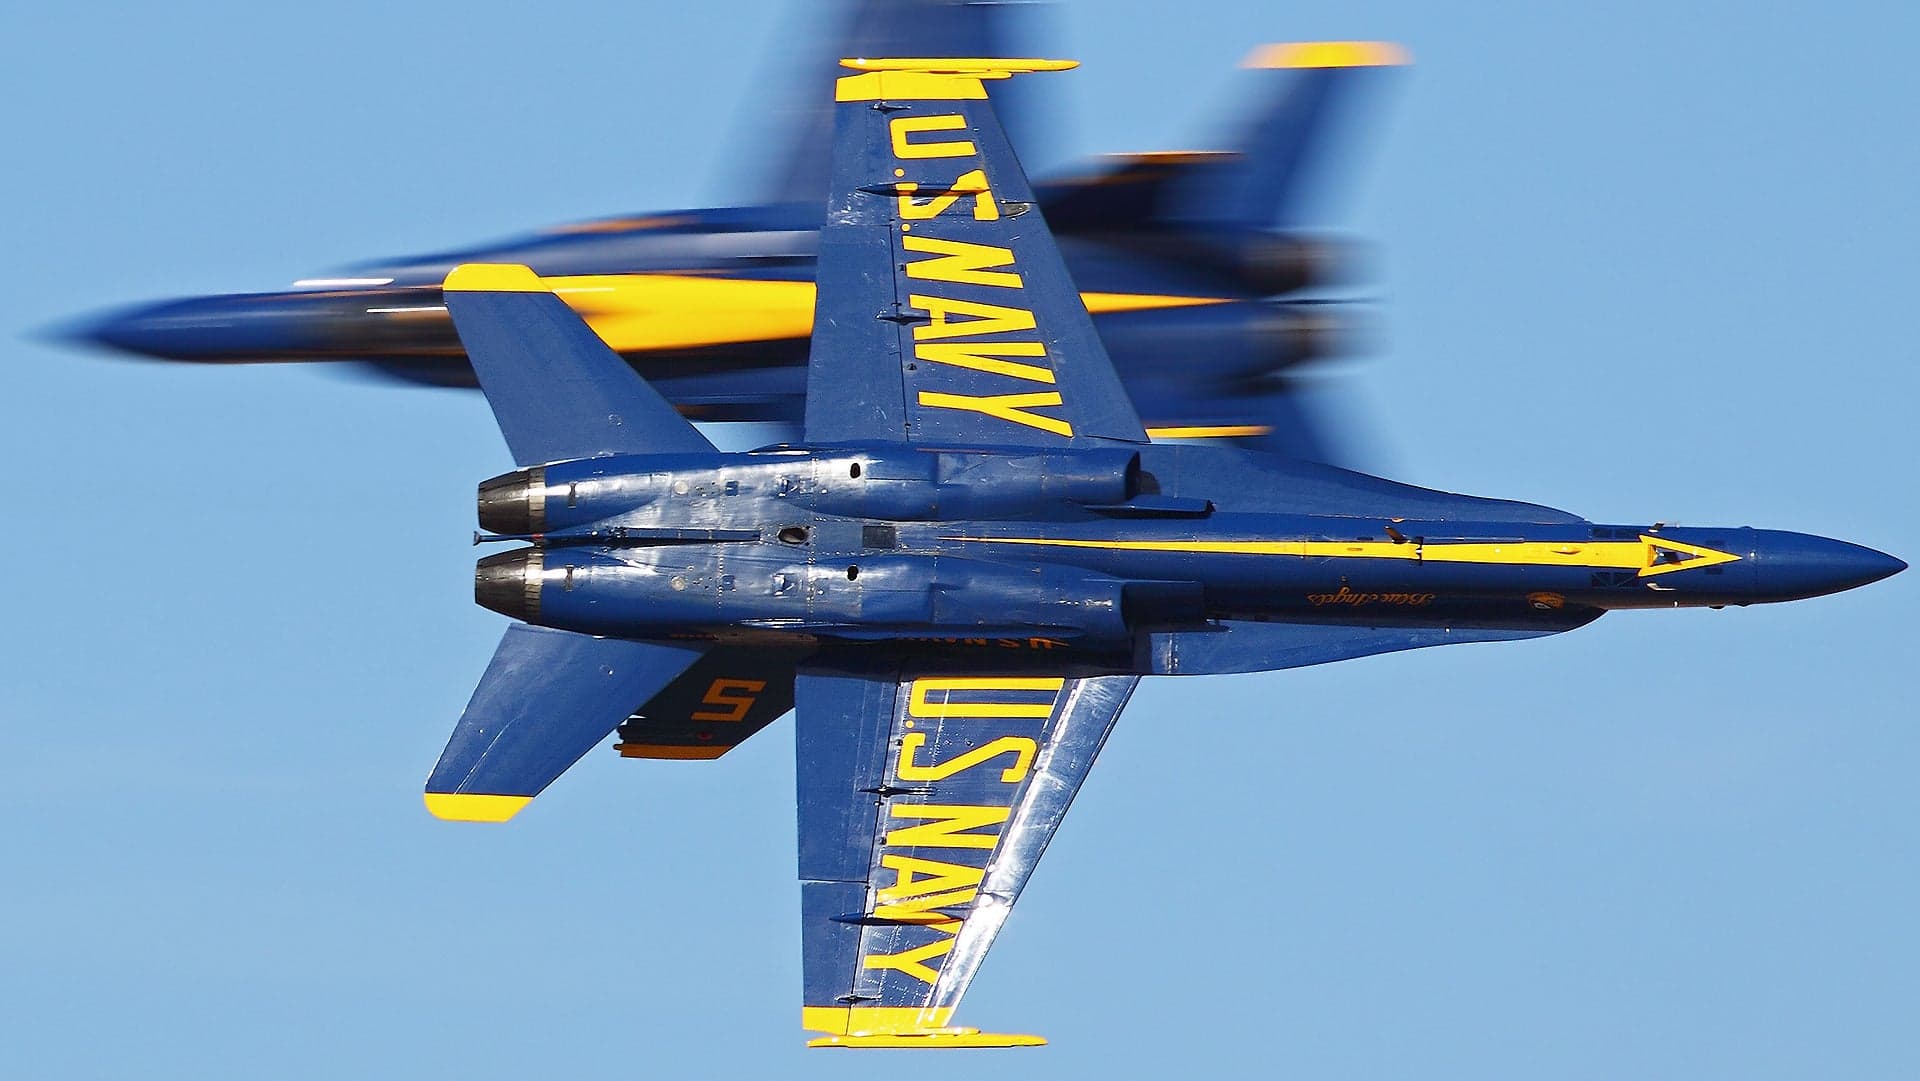 Blue Angels To Get 18 Early Production Super Hornets And Revised Routine For 2021 Season